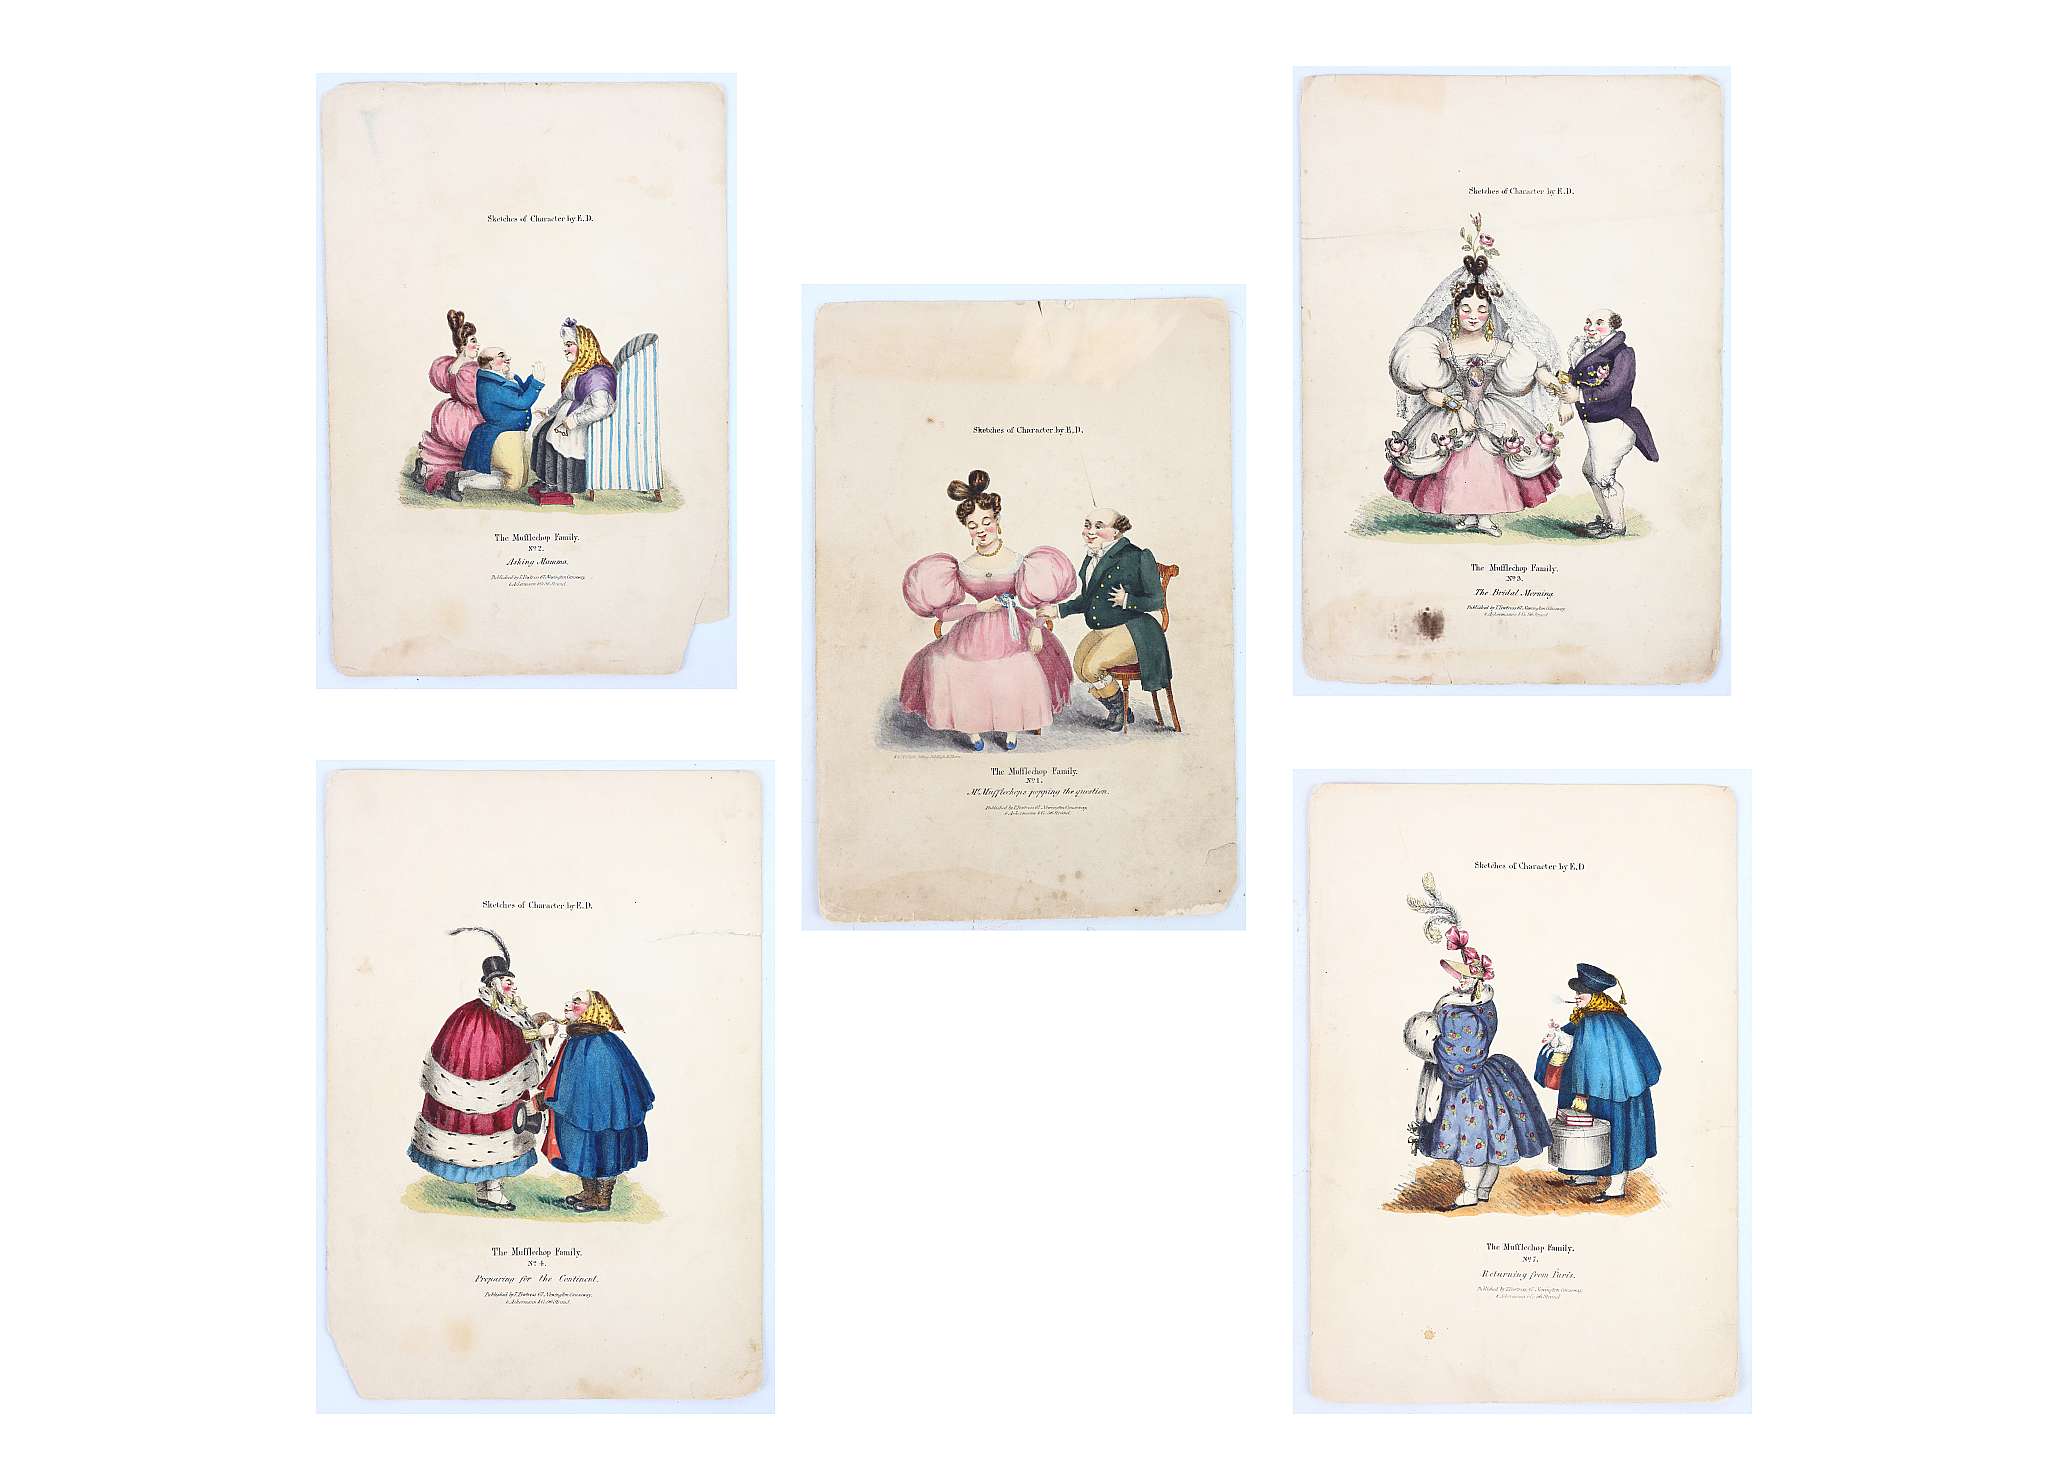 D.[UBUISSON], E.  Sketches of Character by E. D. The Mufflechops Family, No. 1-12. [London]: T.